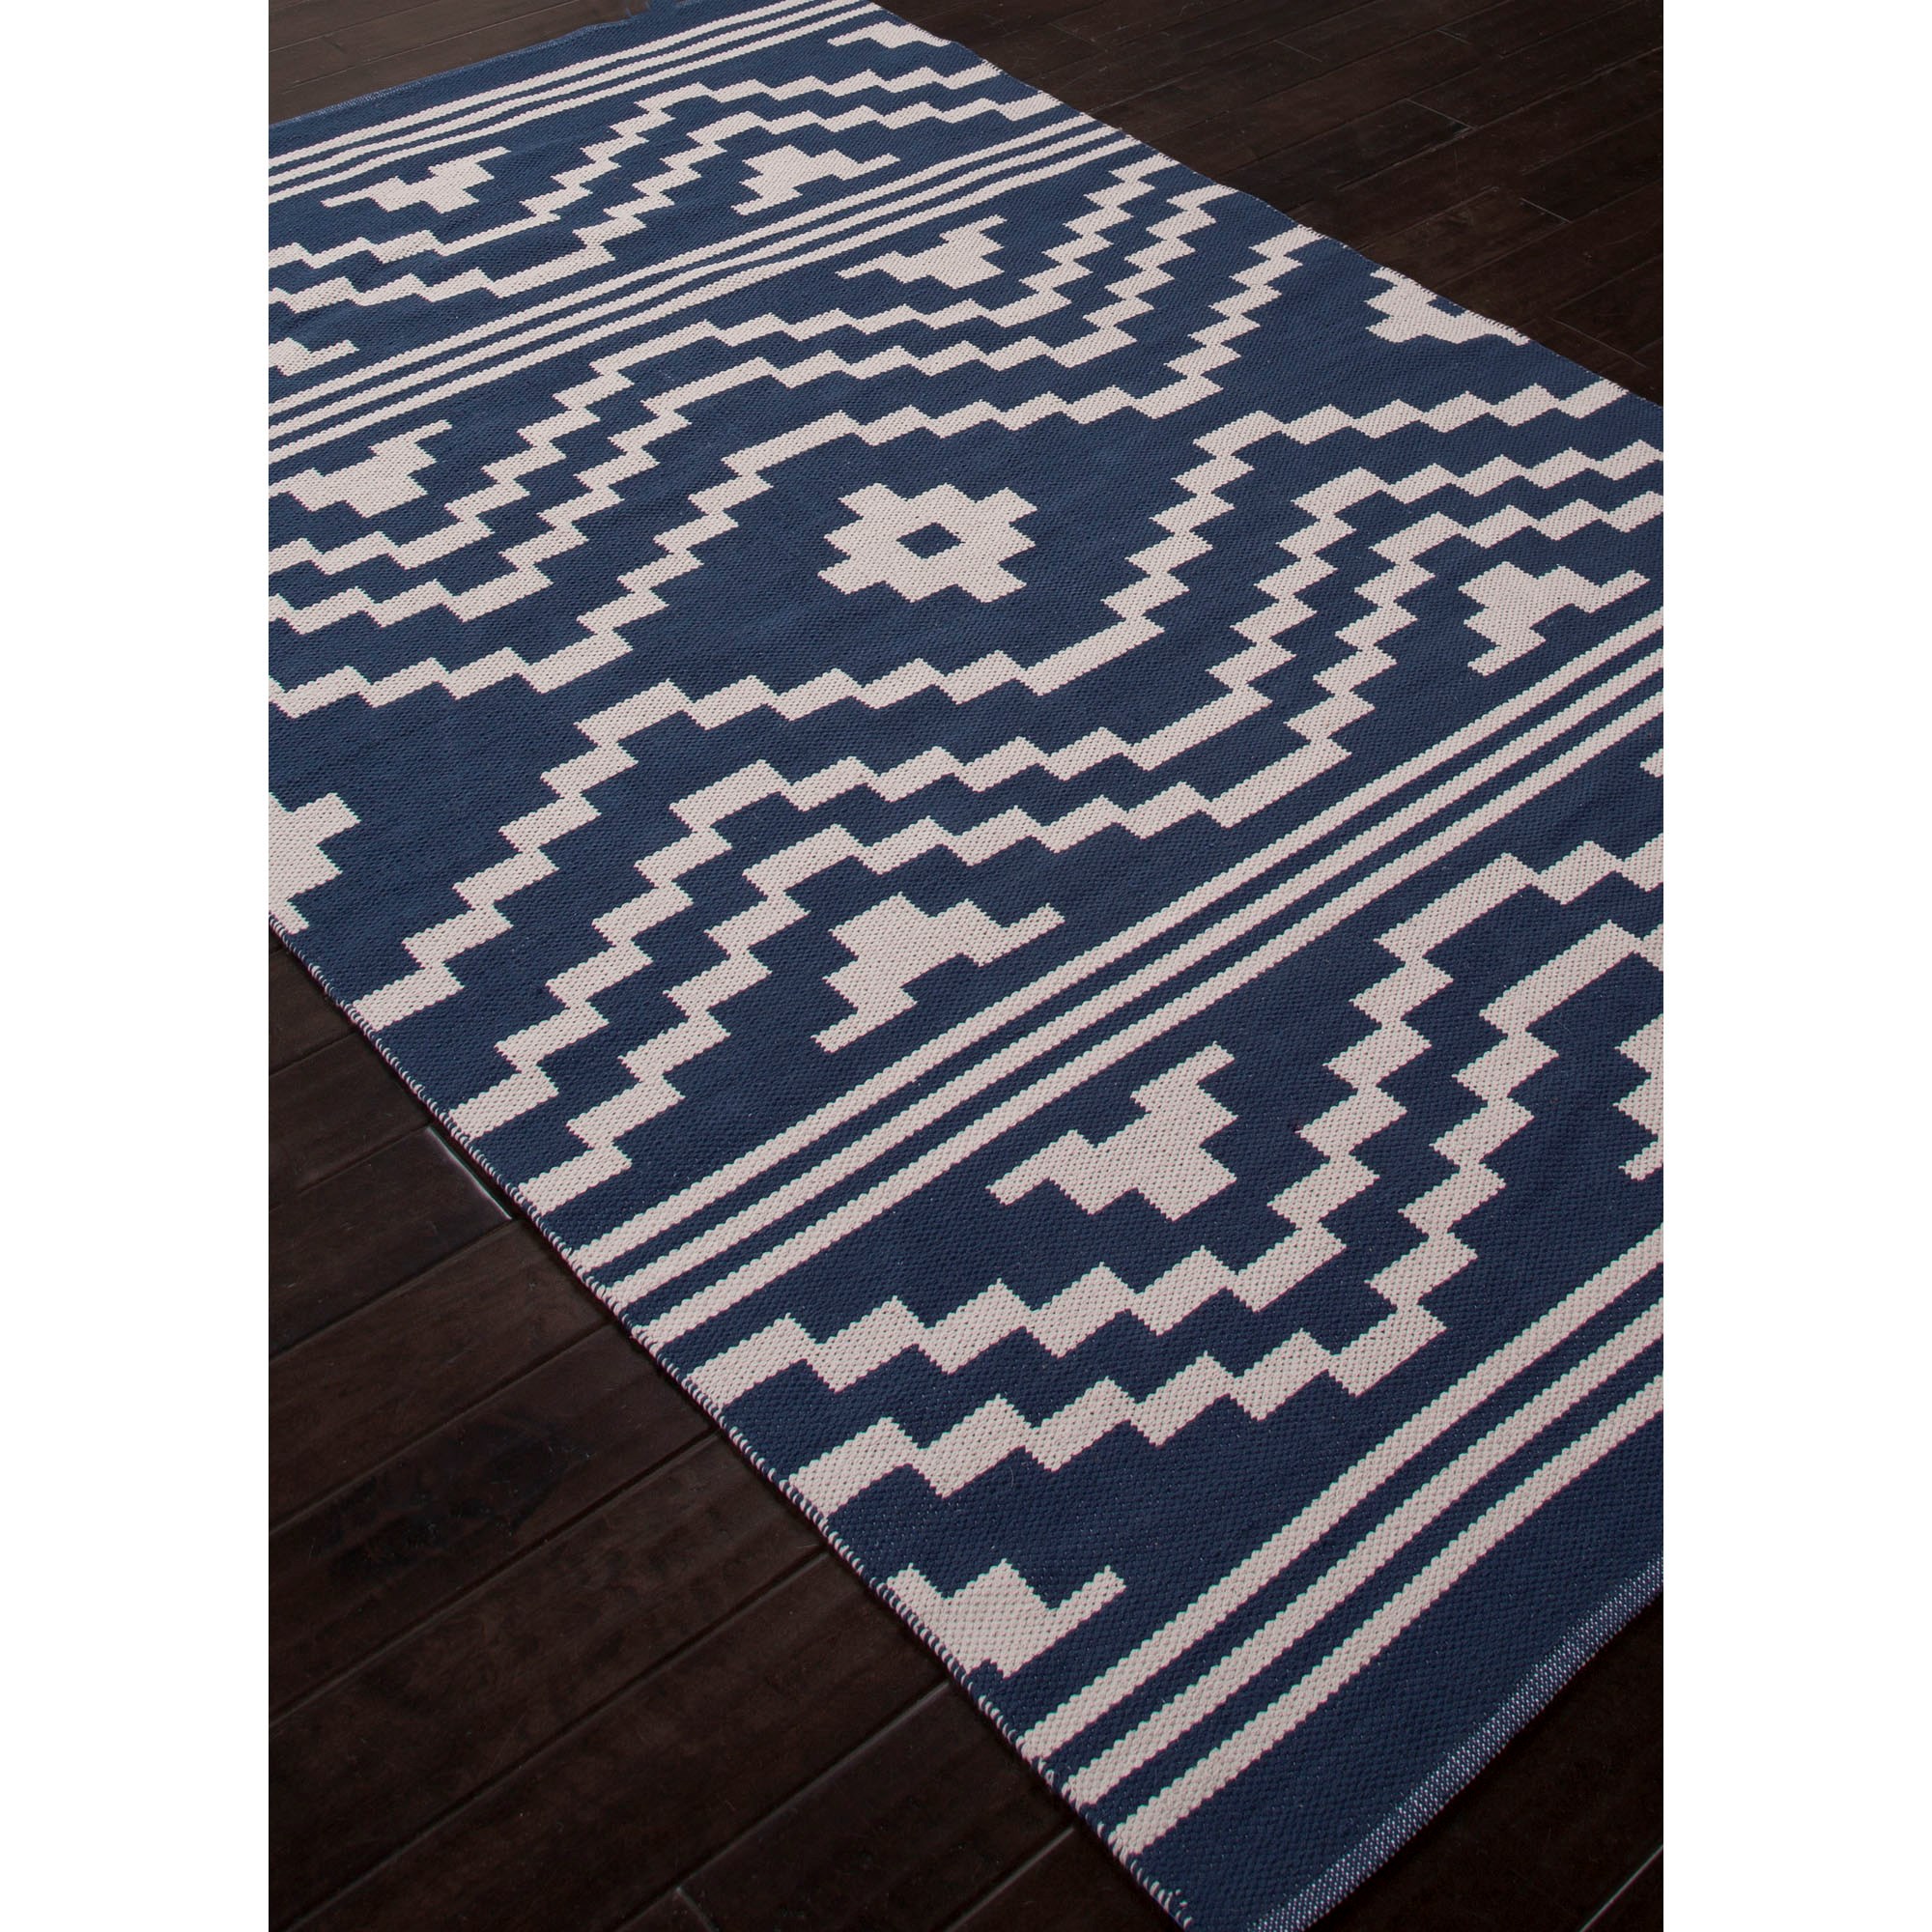 JAIPUR Living Traditions Modern Cotton Flat Weave RUG122225 8 x 11